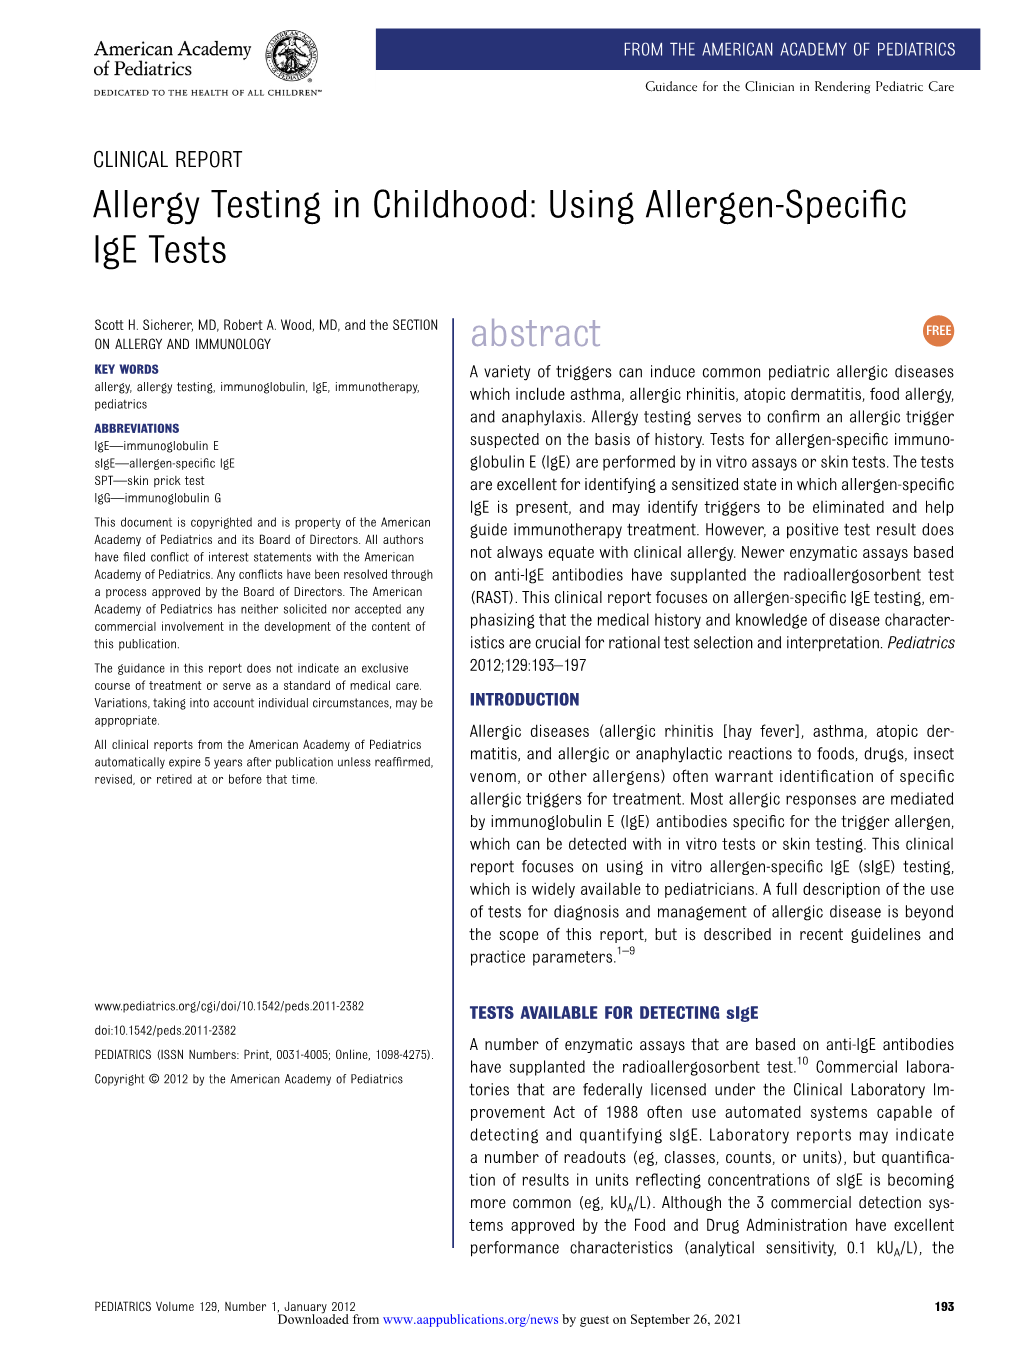 Using Allergen-Specific Ige Tests Abstract